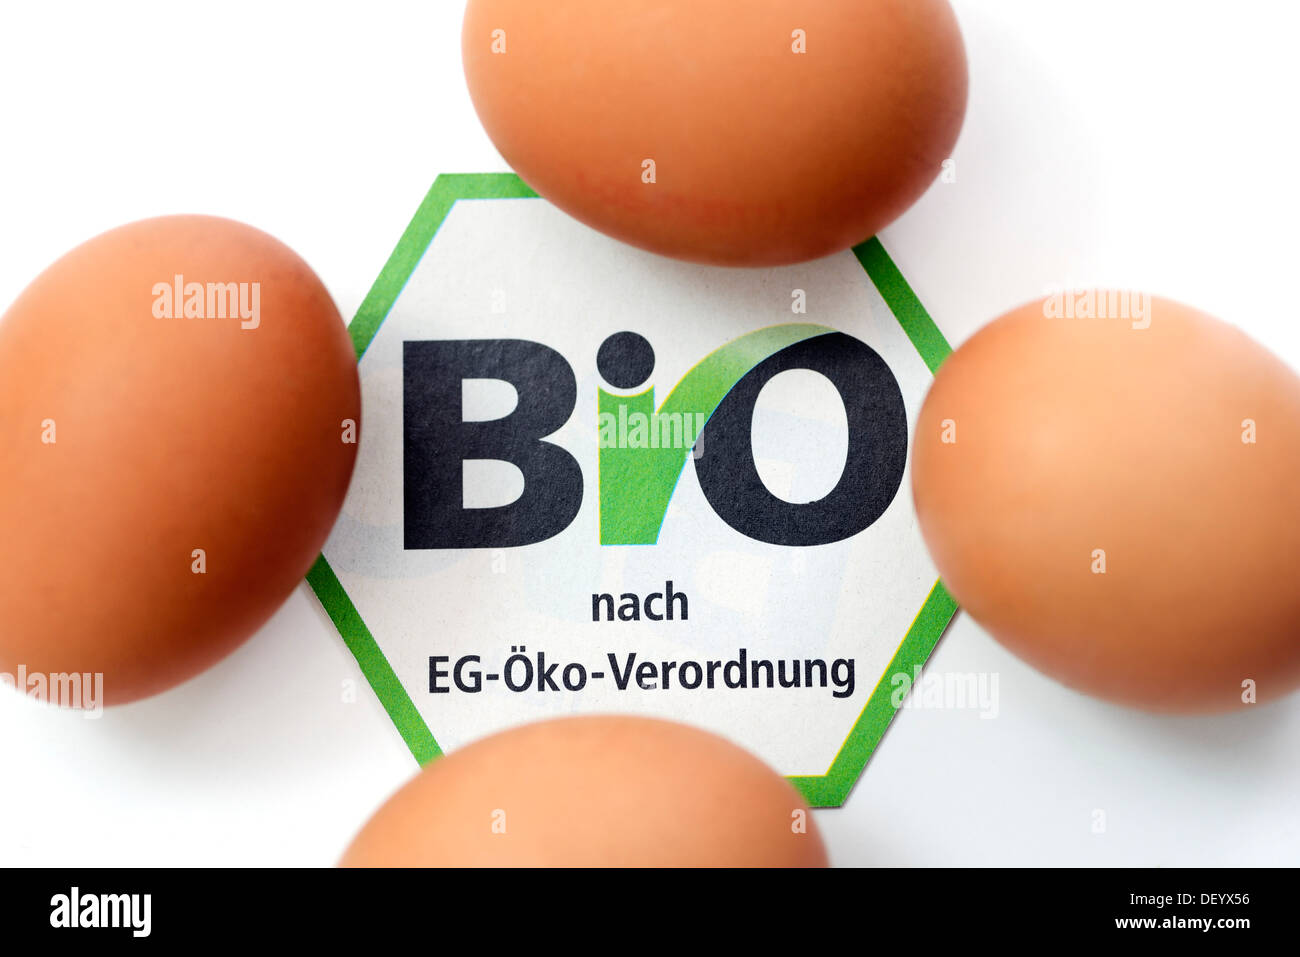 Hen's eggs with organic seal, symbolic image, Germany Stock Photo